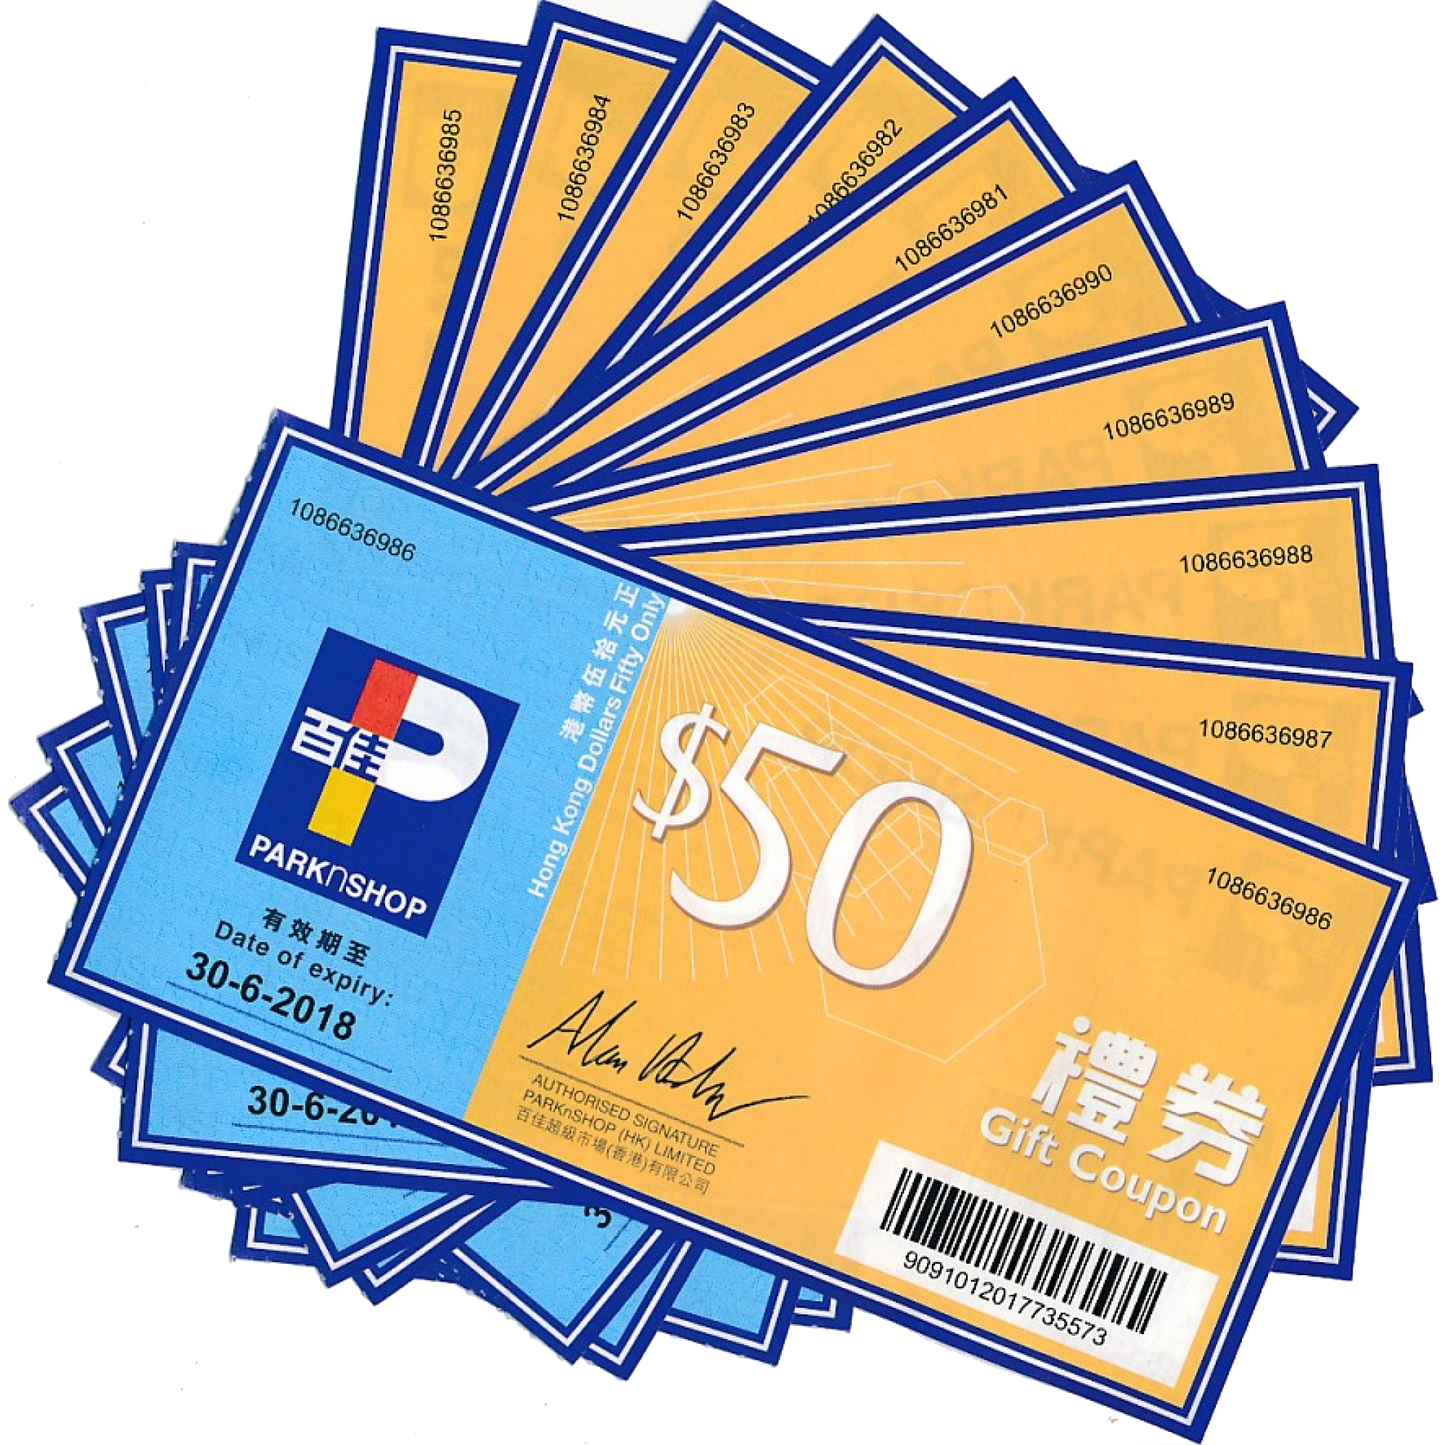 【Nice】MOB Premium Health Checkup Plan $3999 Gift Voucher Up to $2500 Value